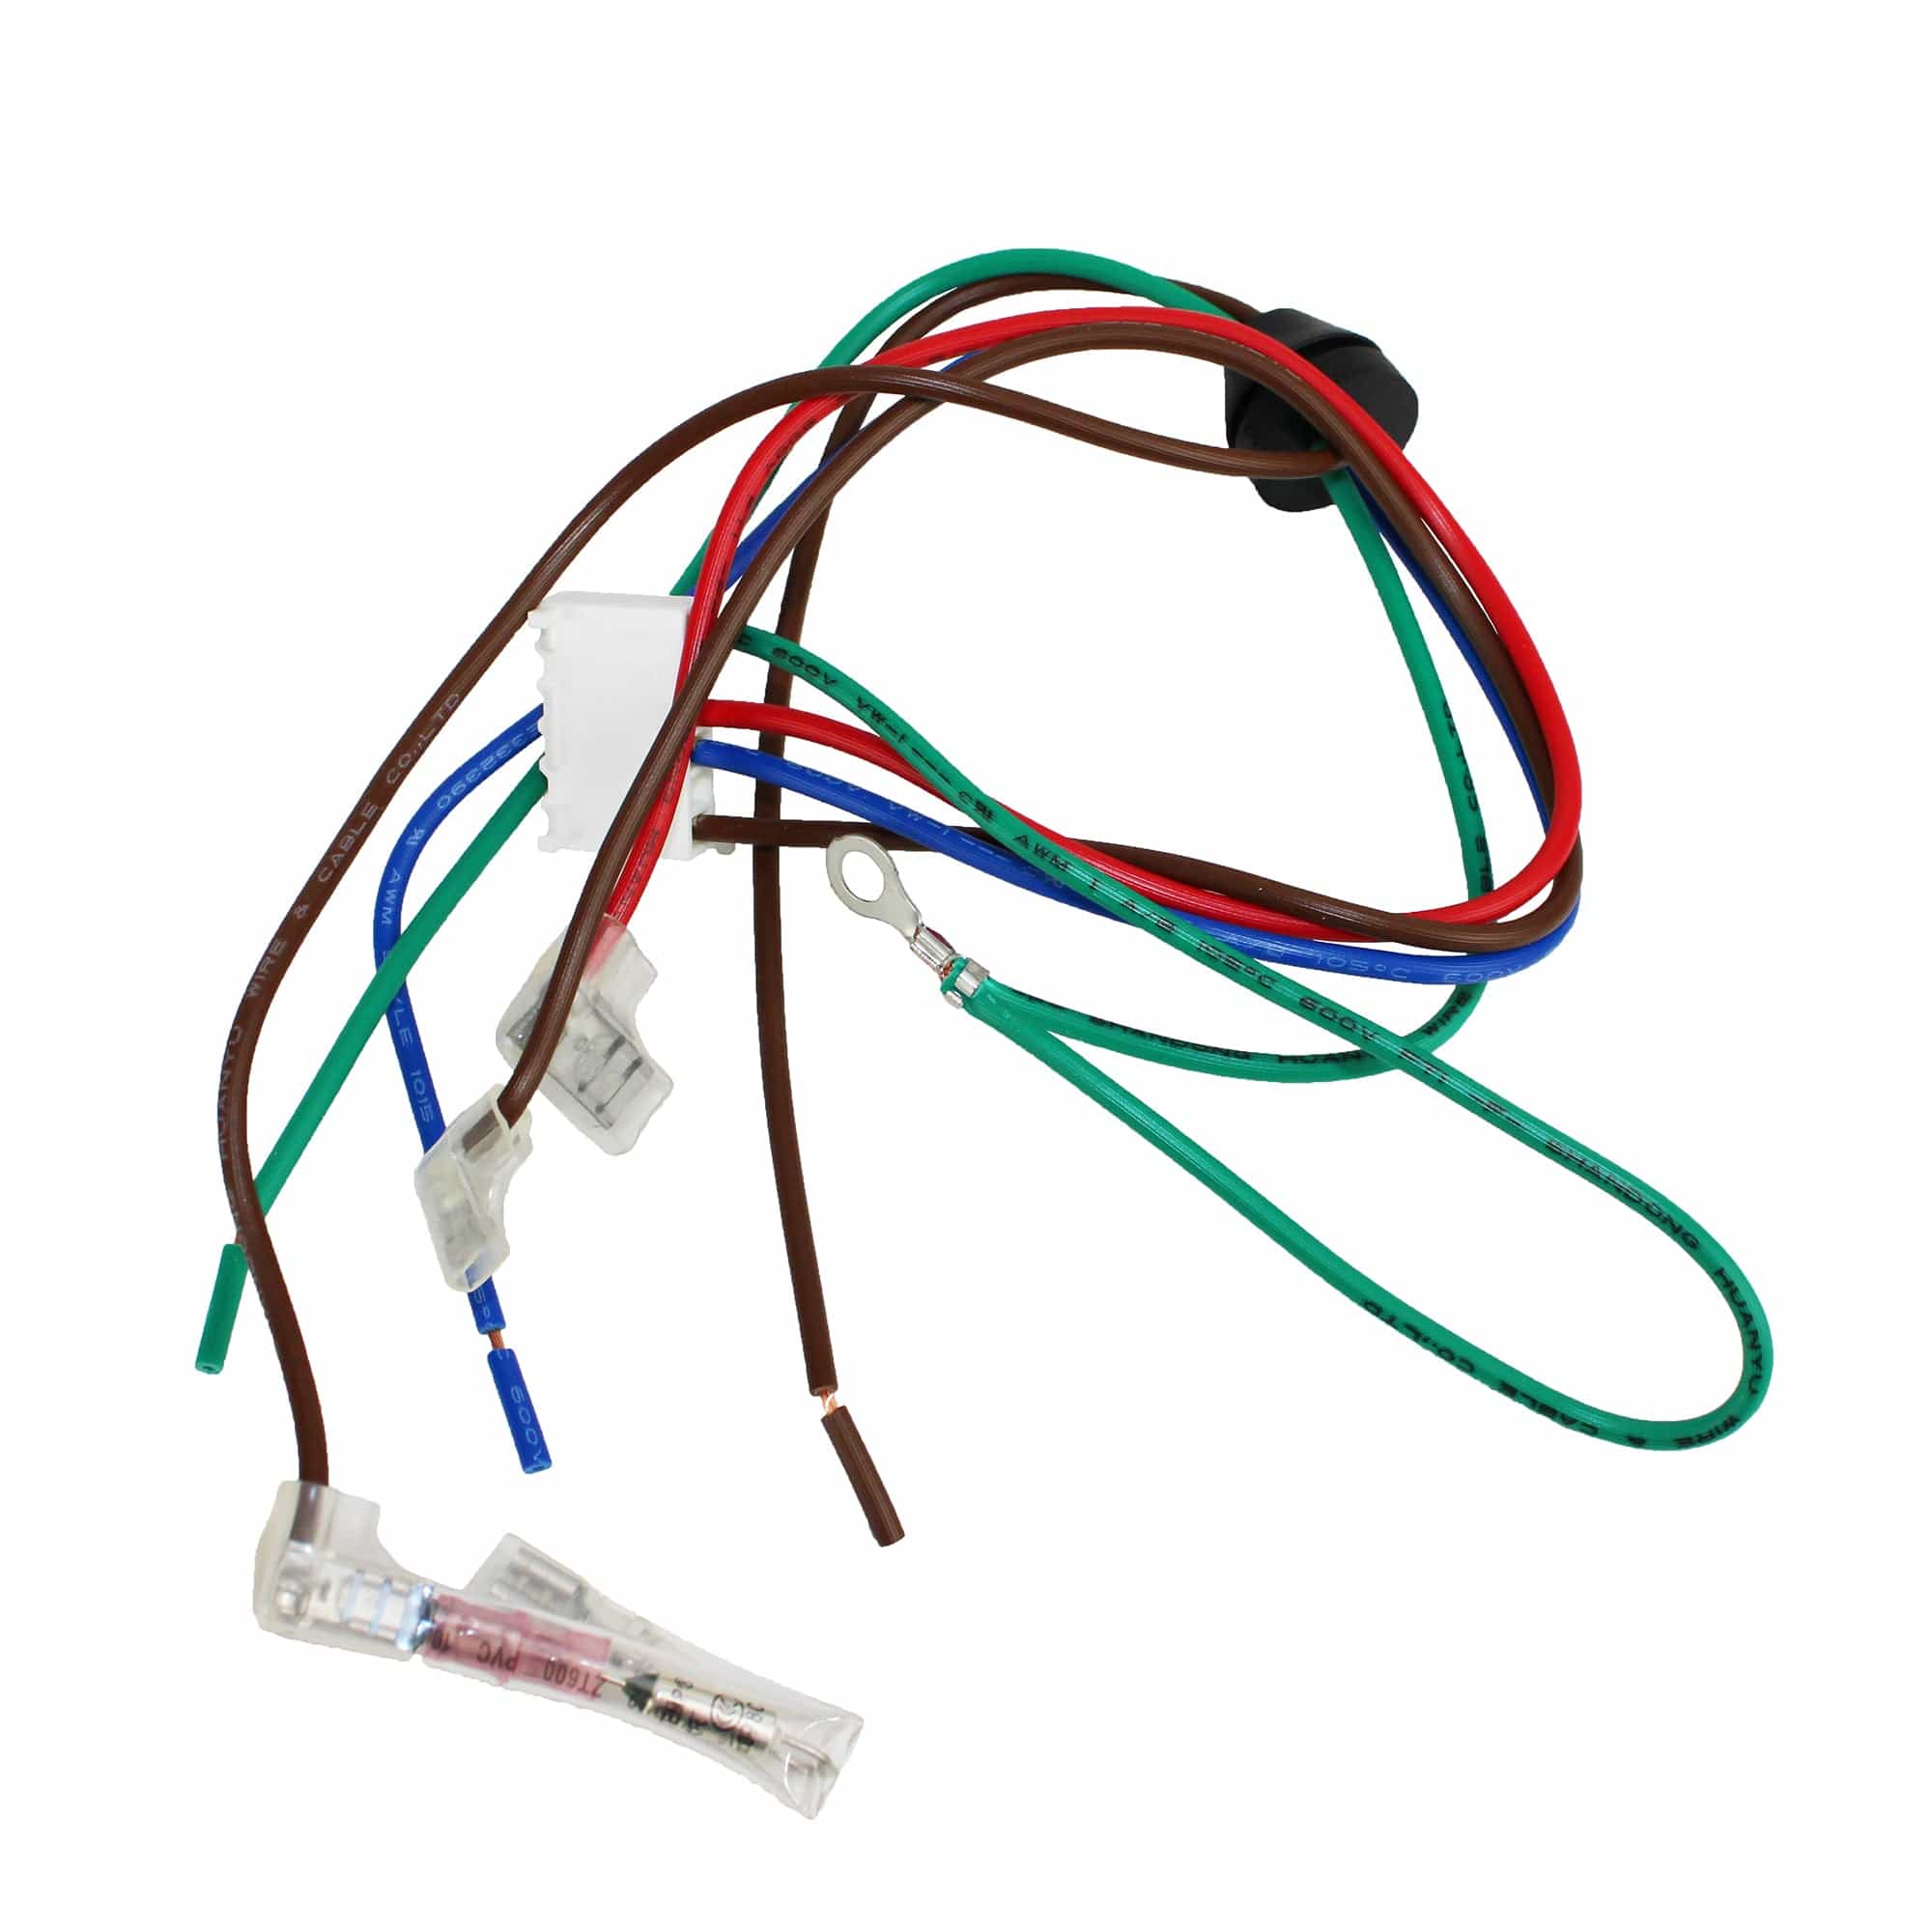 Dometic 92076 Water Heater Wiring Harness